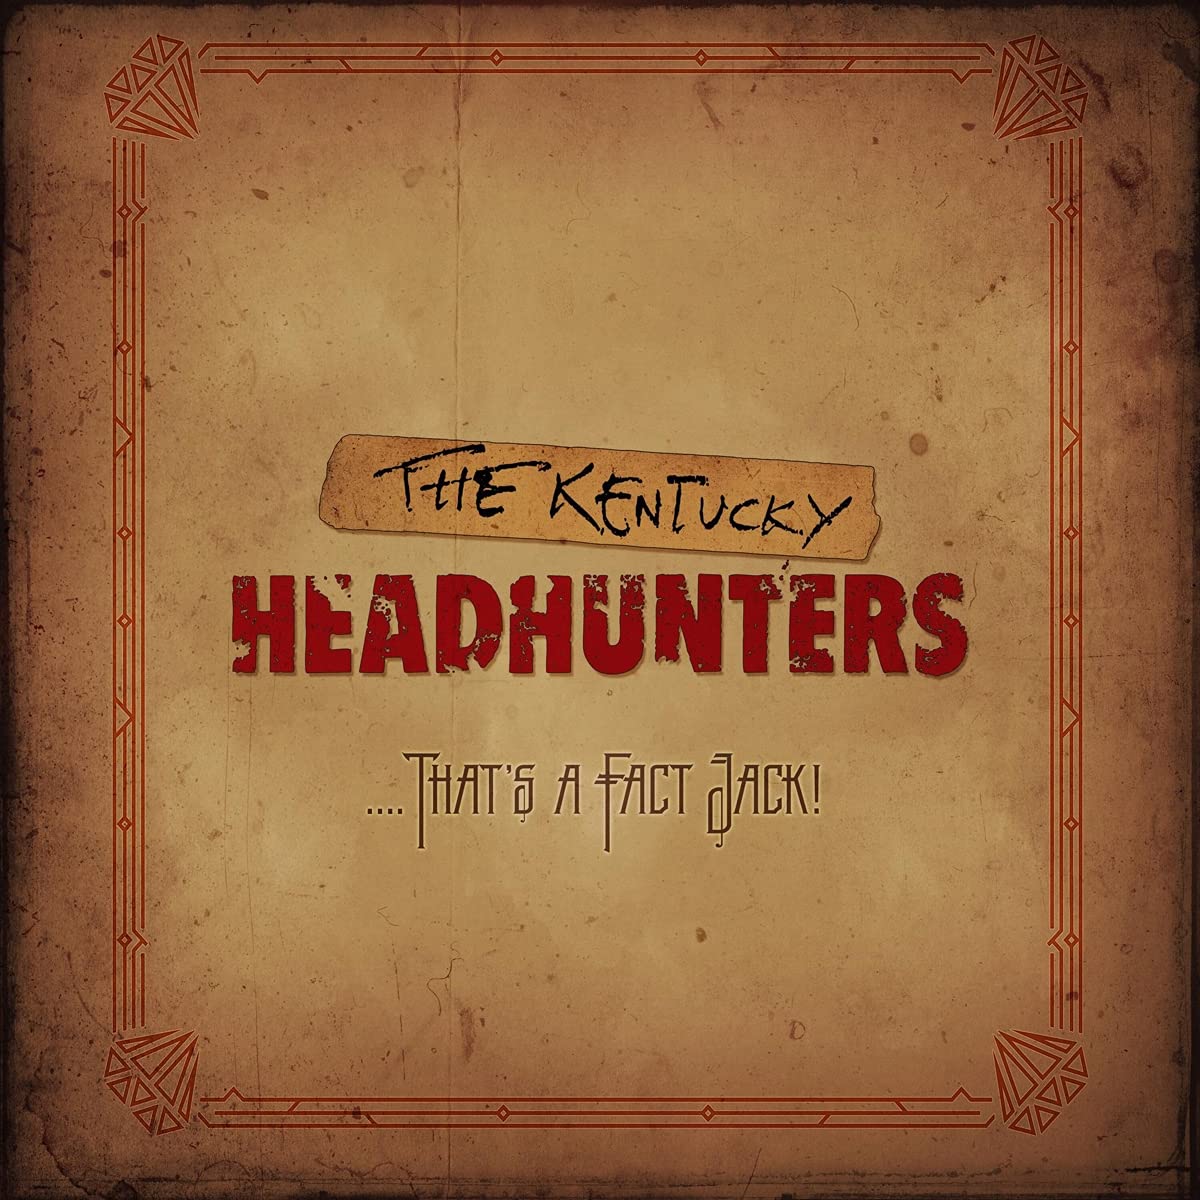 The Kentucky Headhunters - ...That’s A Fact Jack!